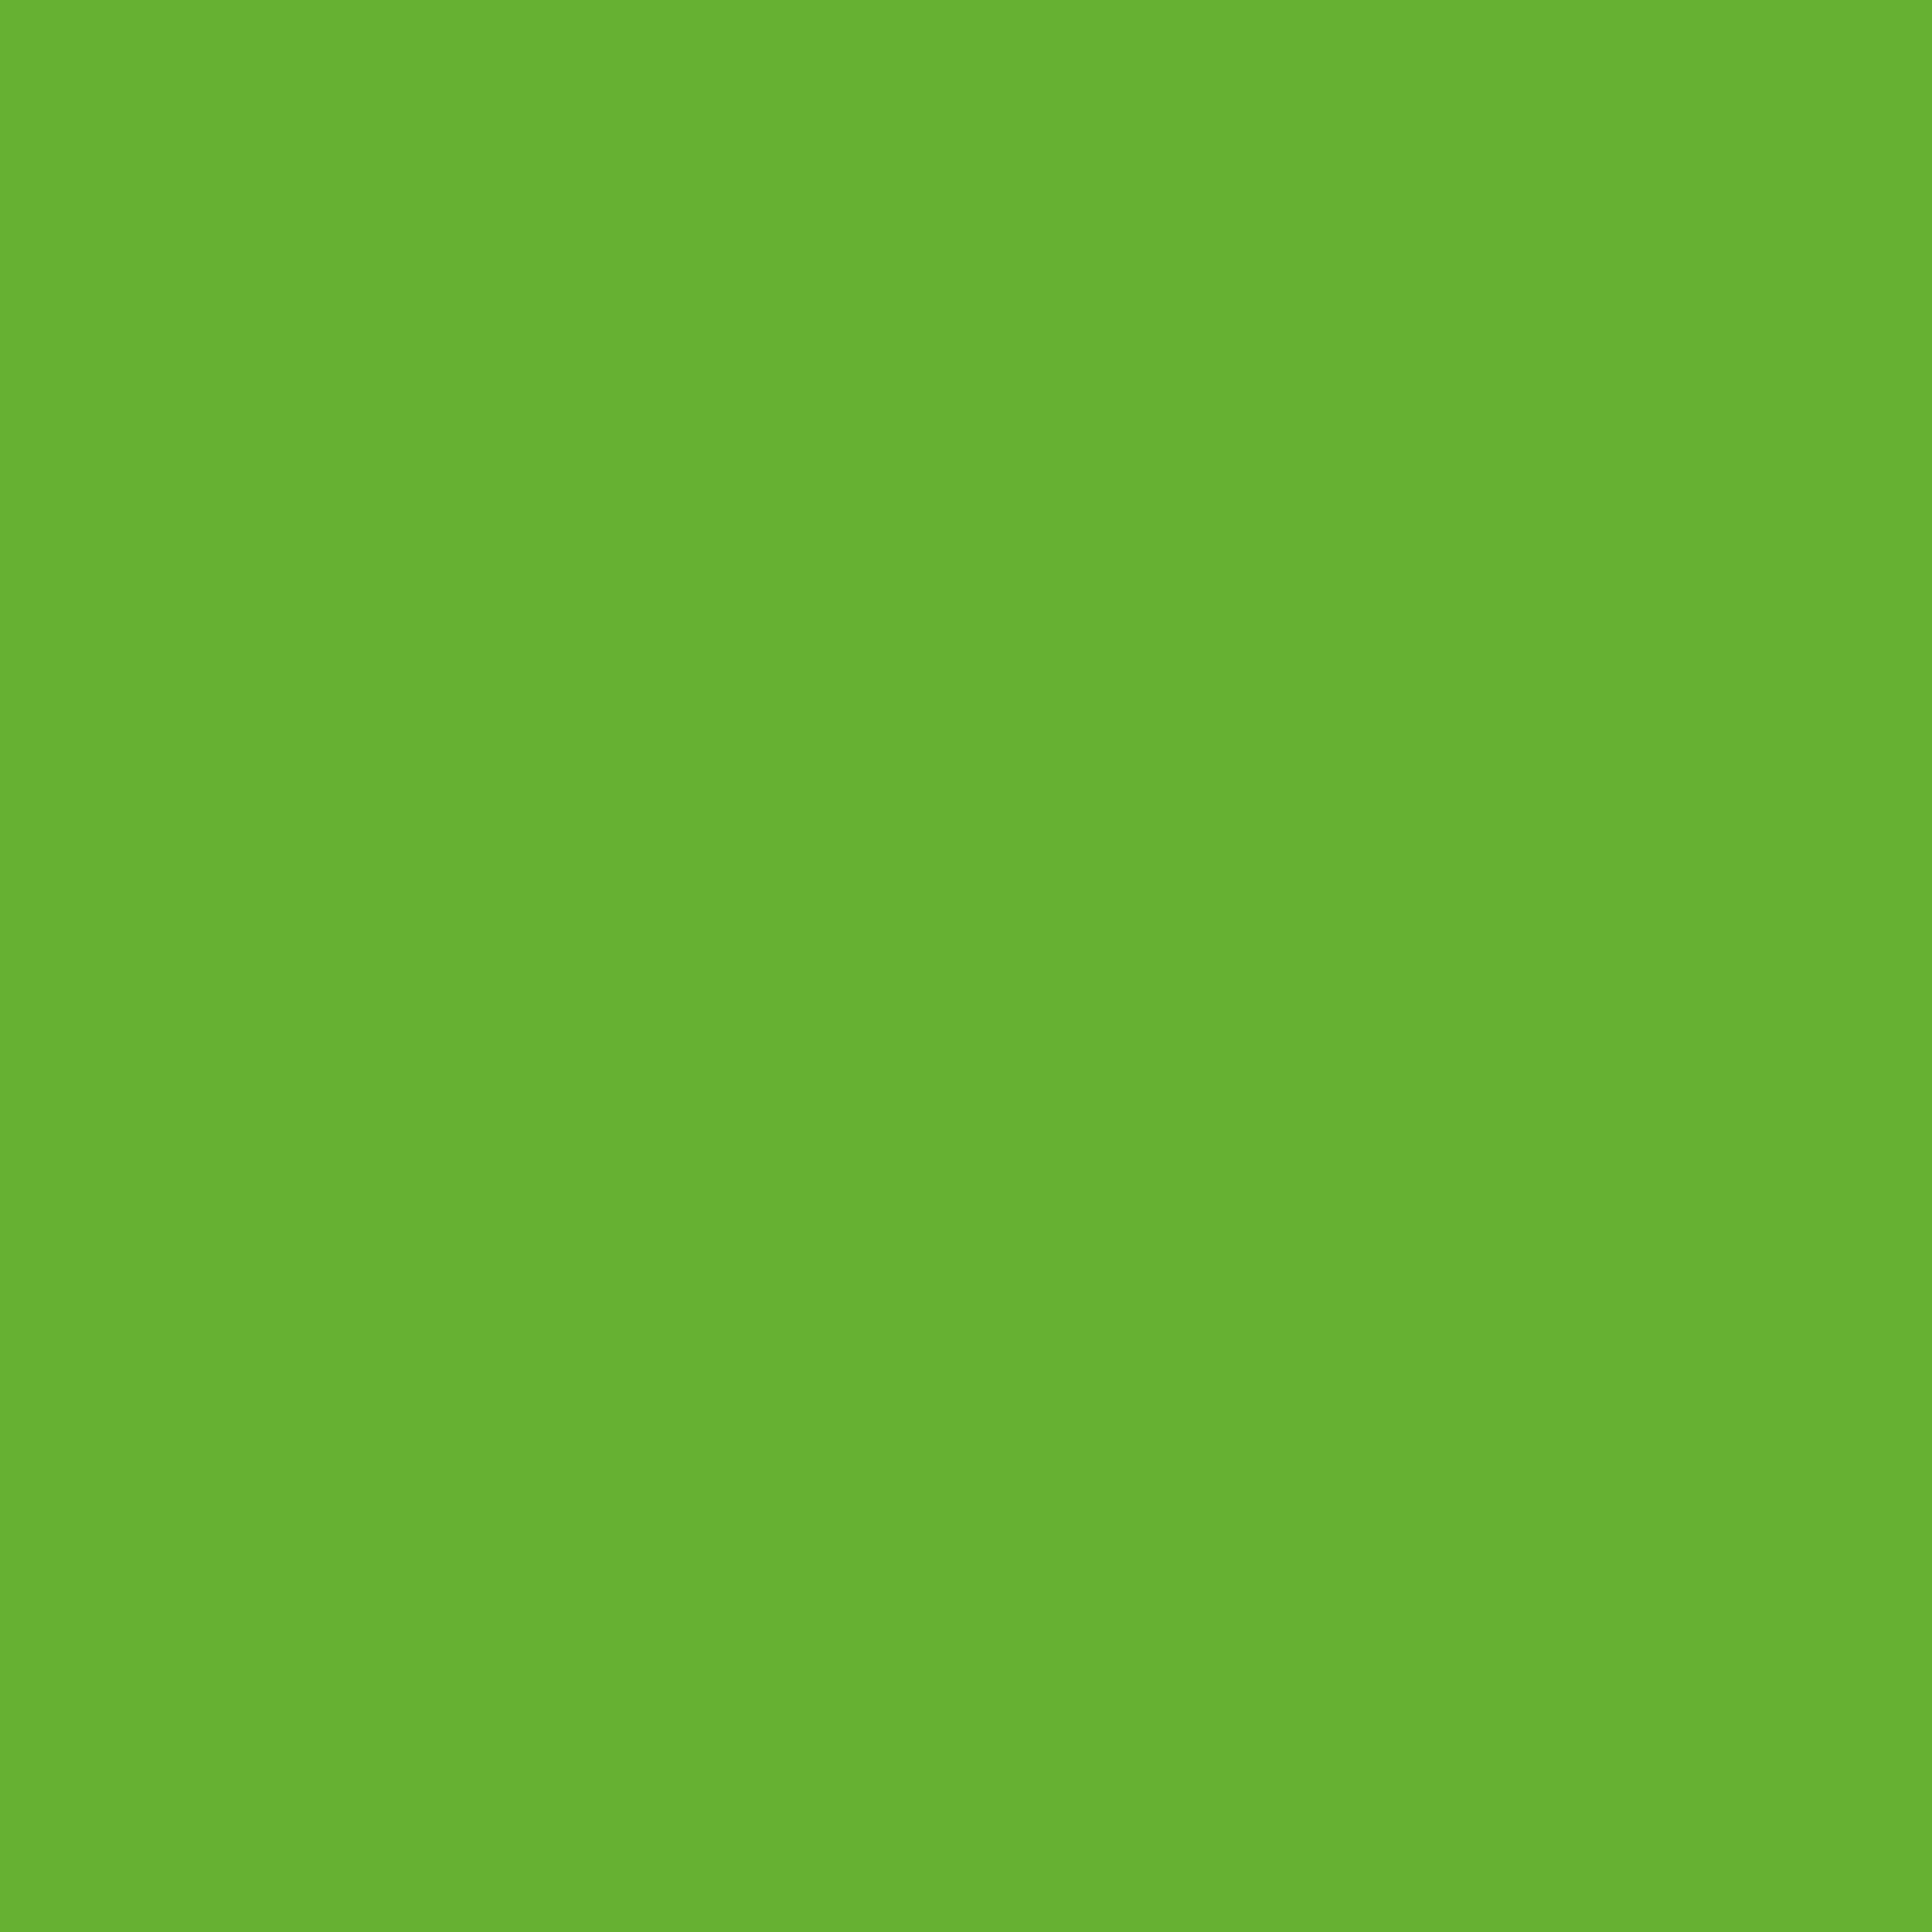 2732x2732 Green RYB Solid Color Background